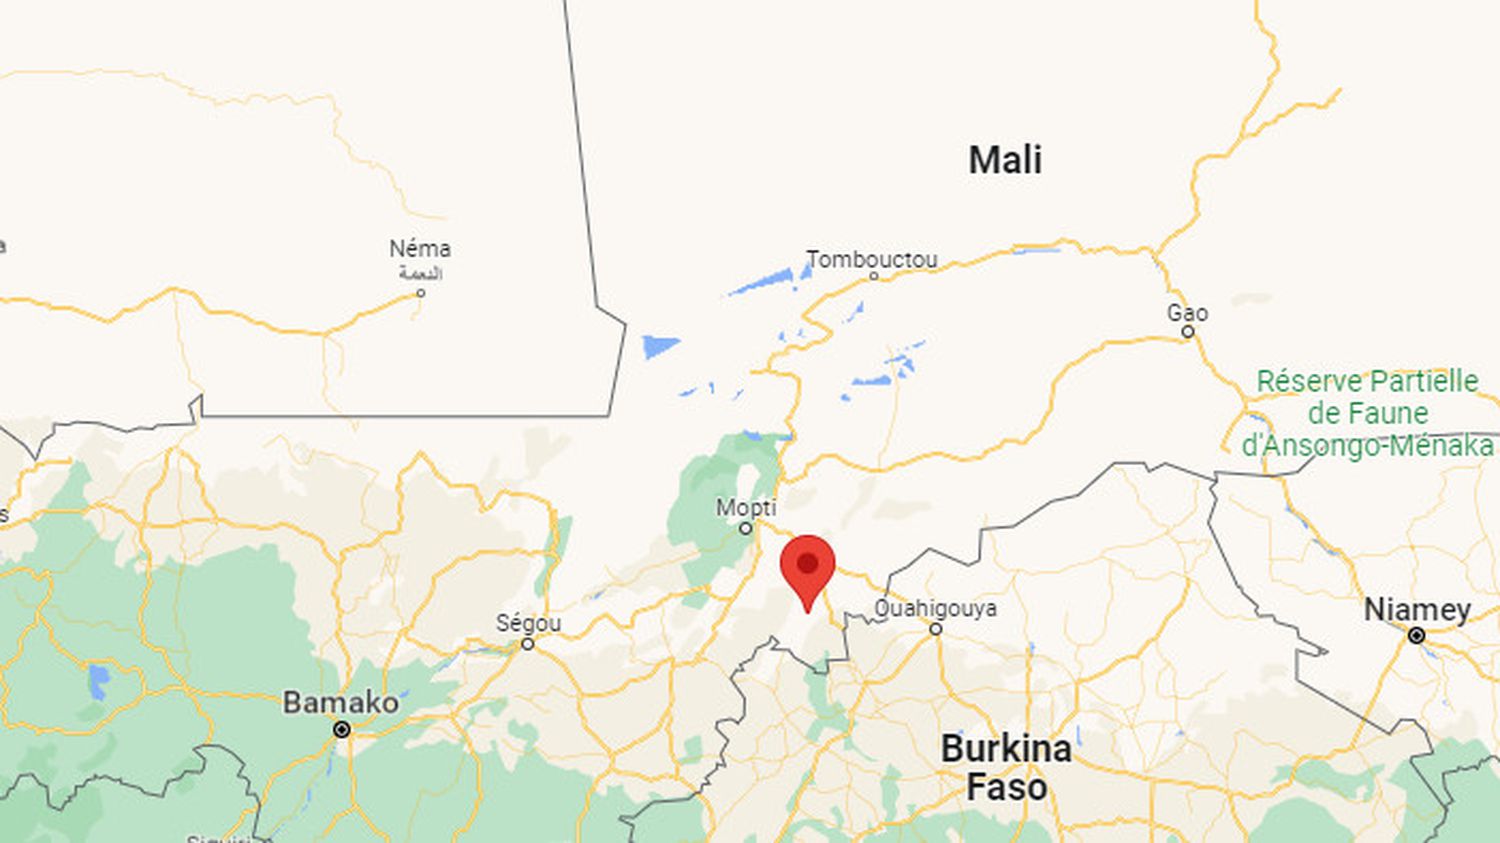 Mali: more than 130 civilians killed by suspected jihadists in the center of the country
